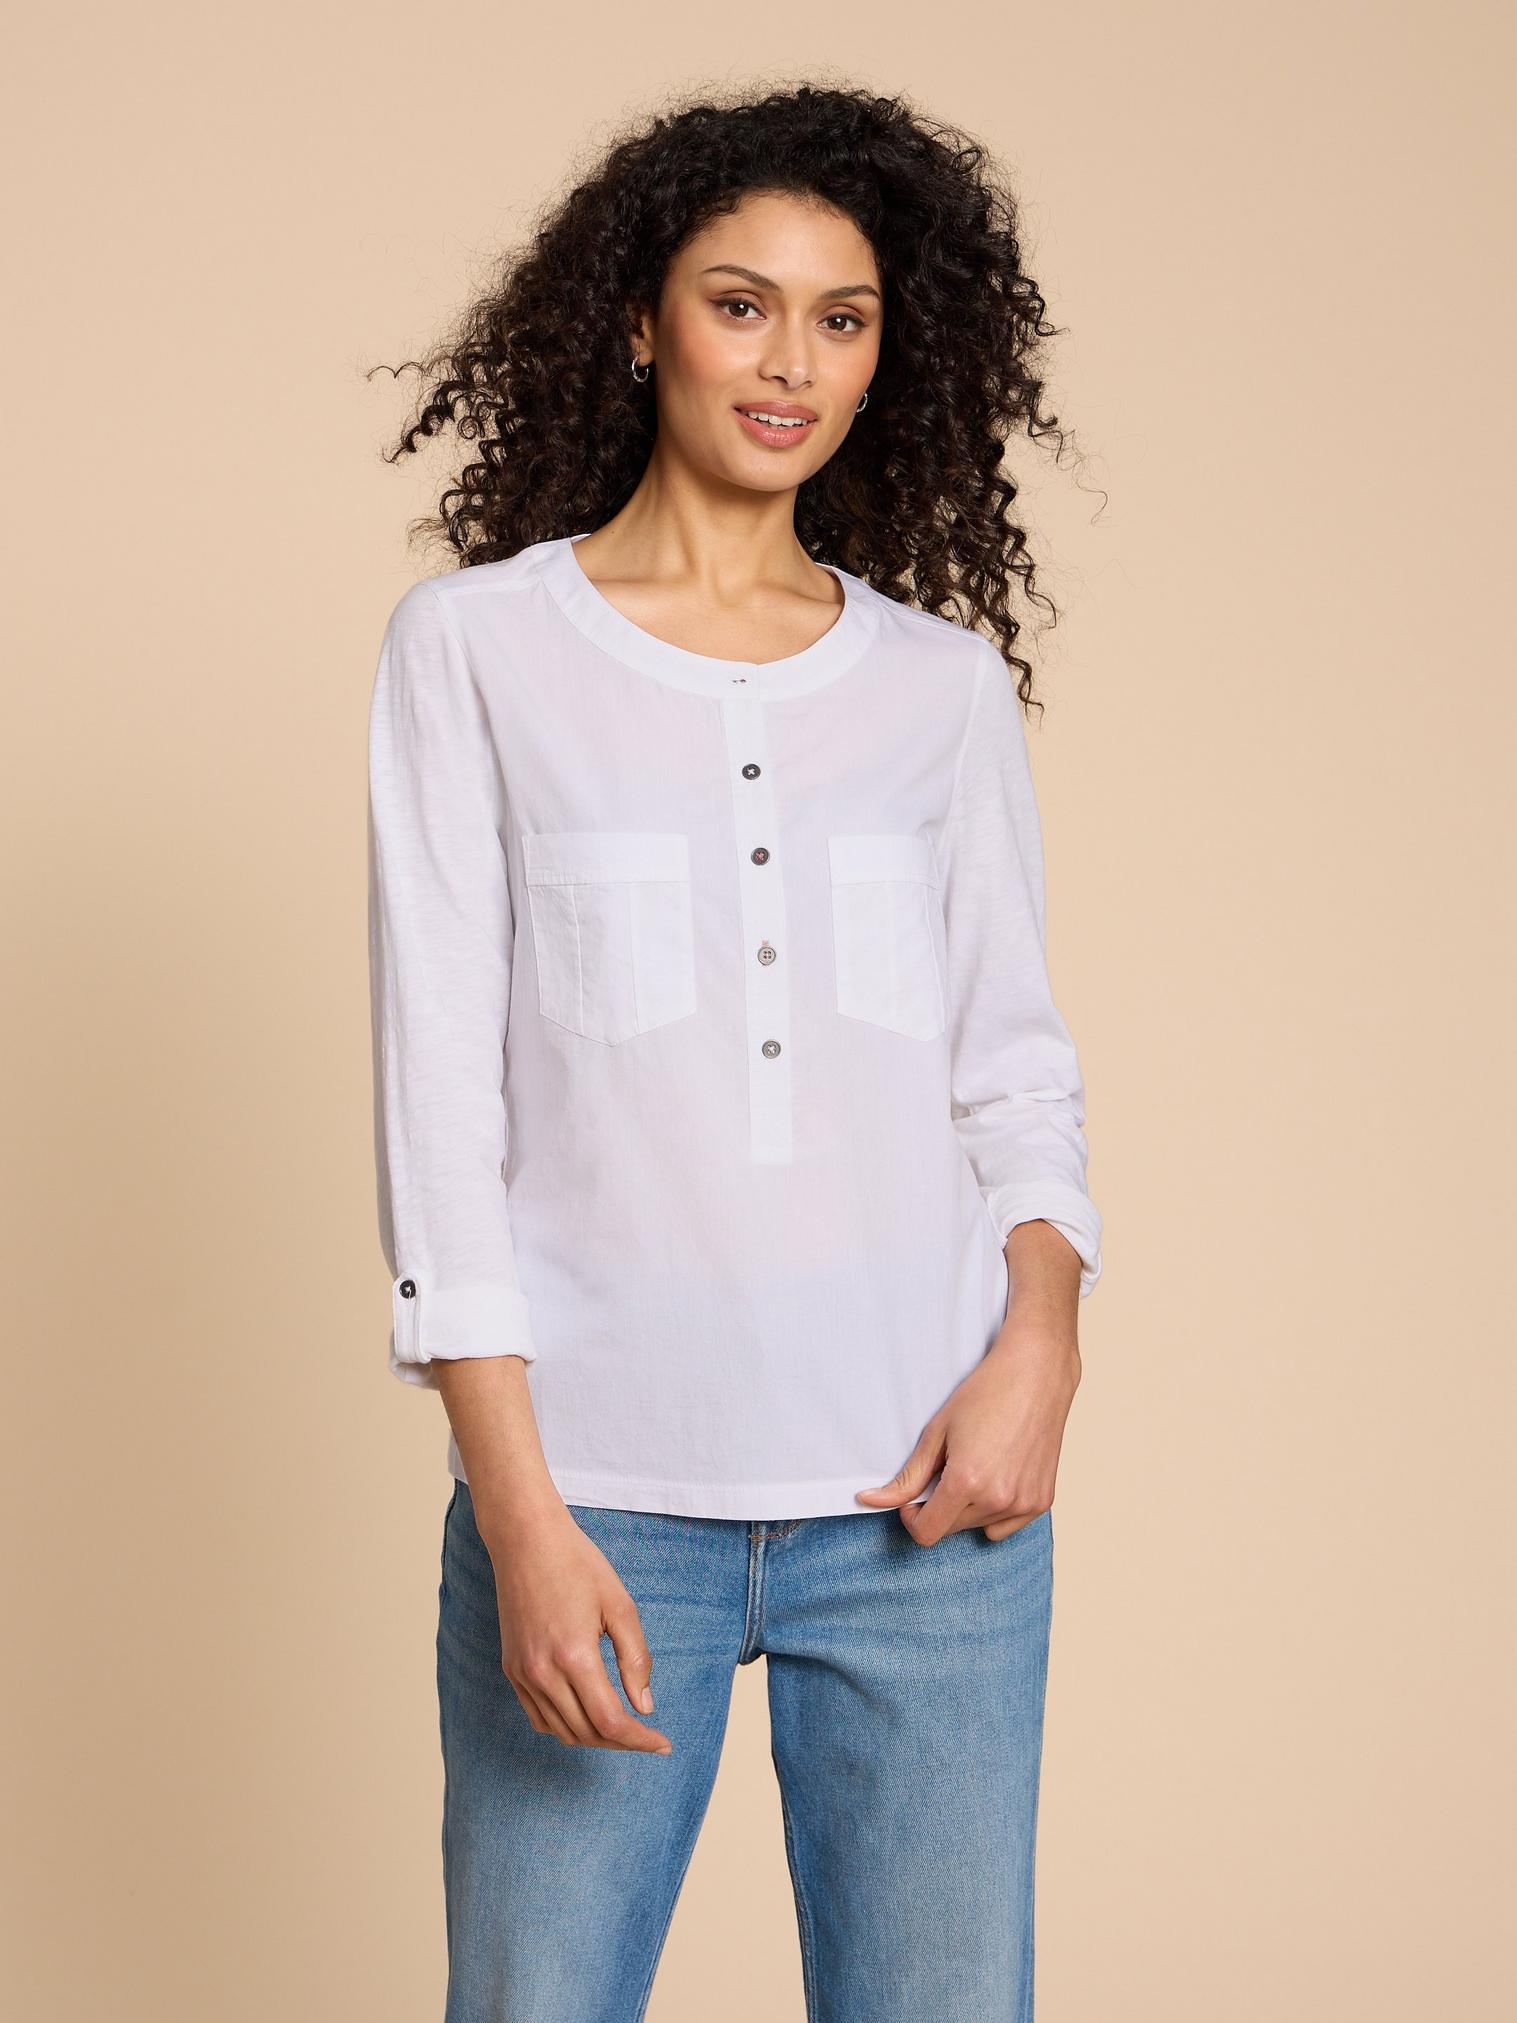 MACLEY MIX SHIRT in PALE IVORY - LIFESTYLE